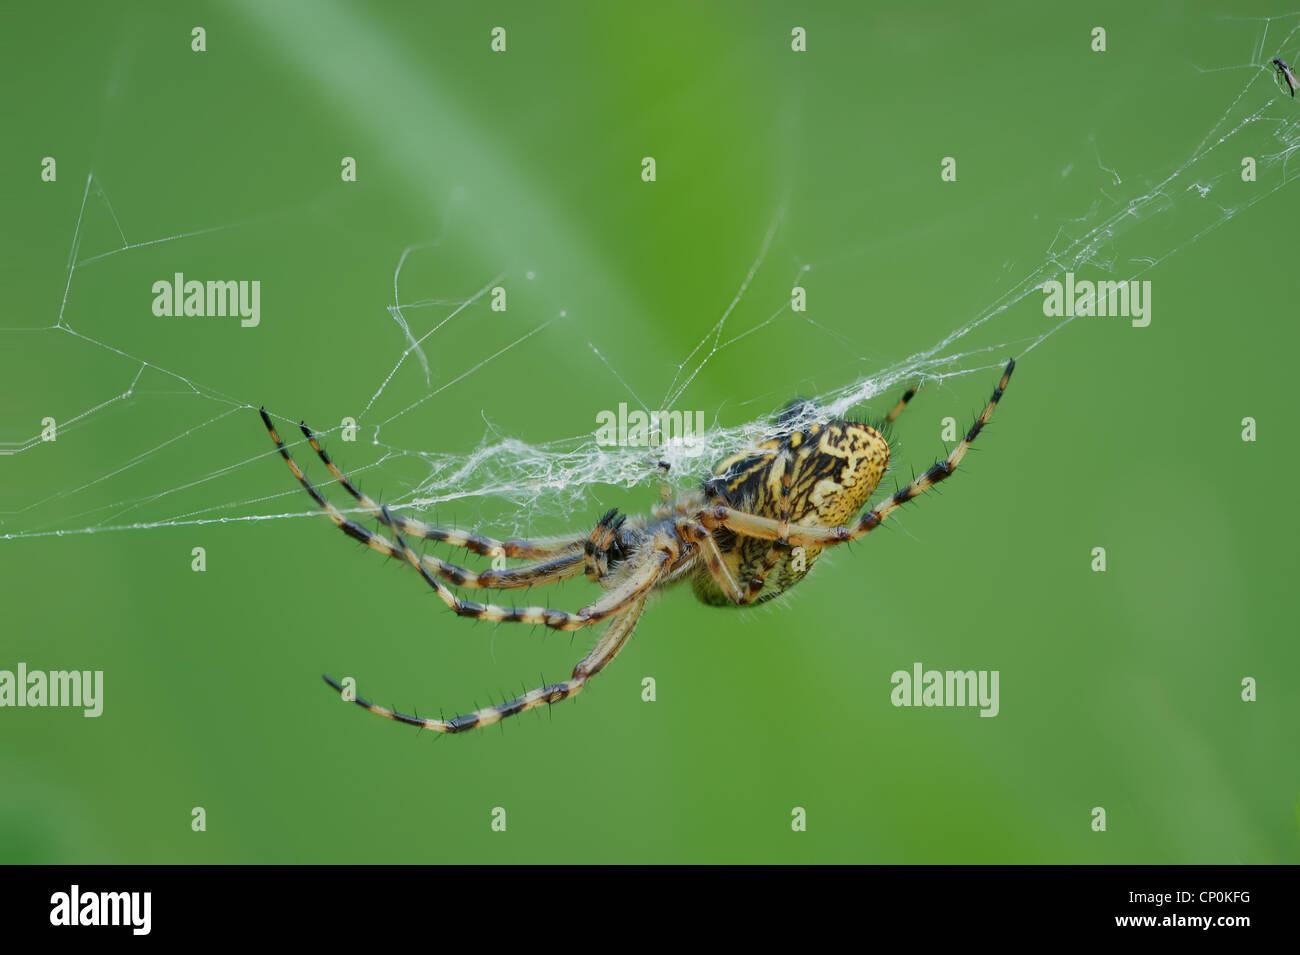 Spiders (order Araneae) are air-breathing arthropods that have eight legs and chelicerae with fangs that inject venom. Stock Photo